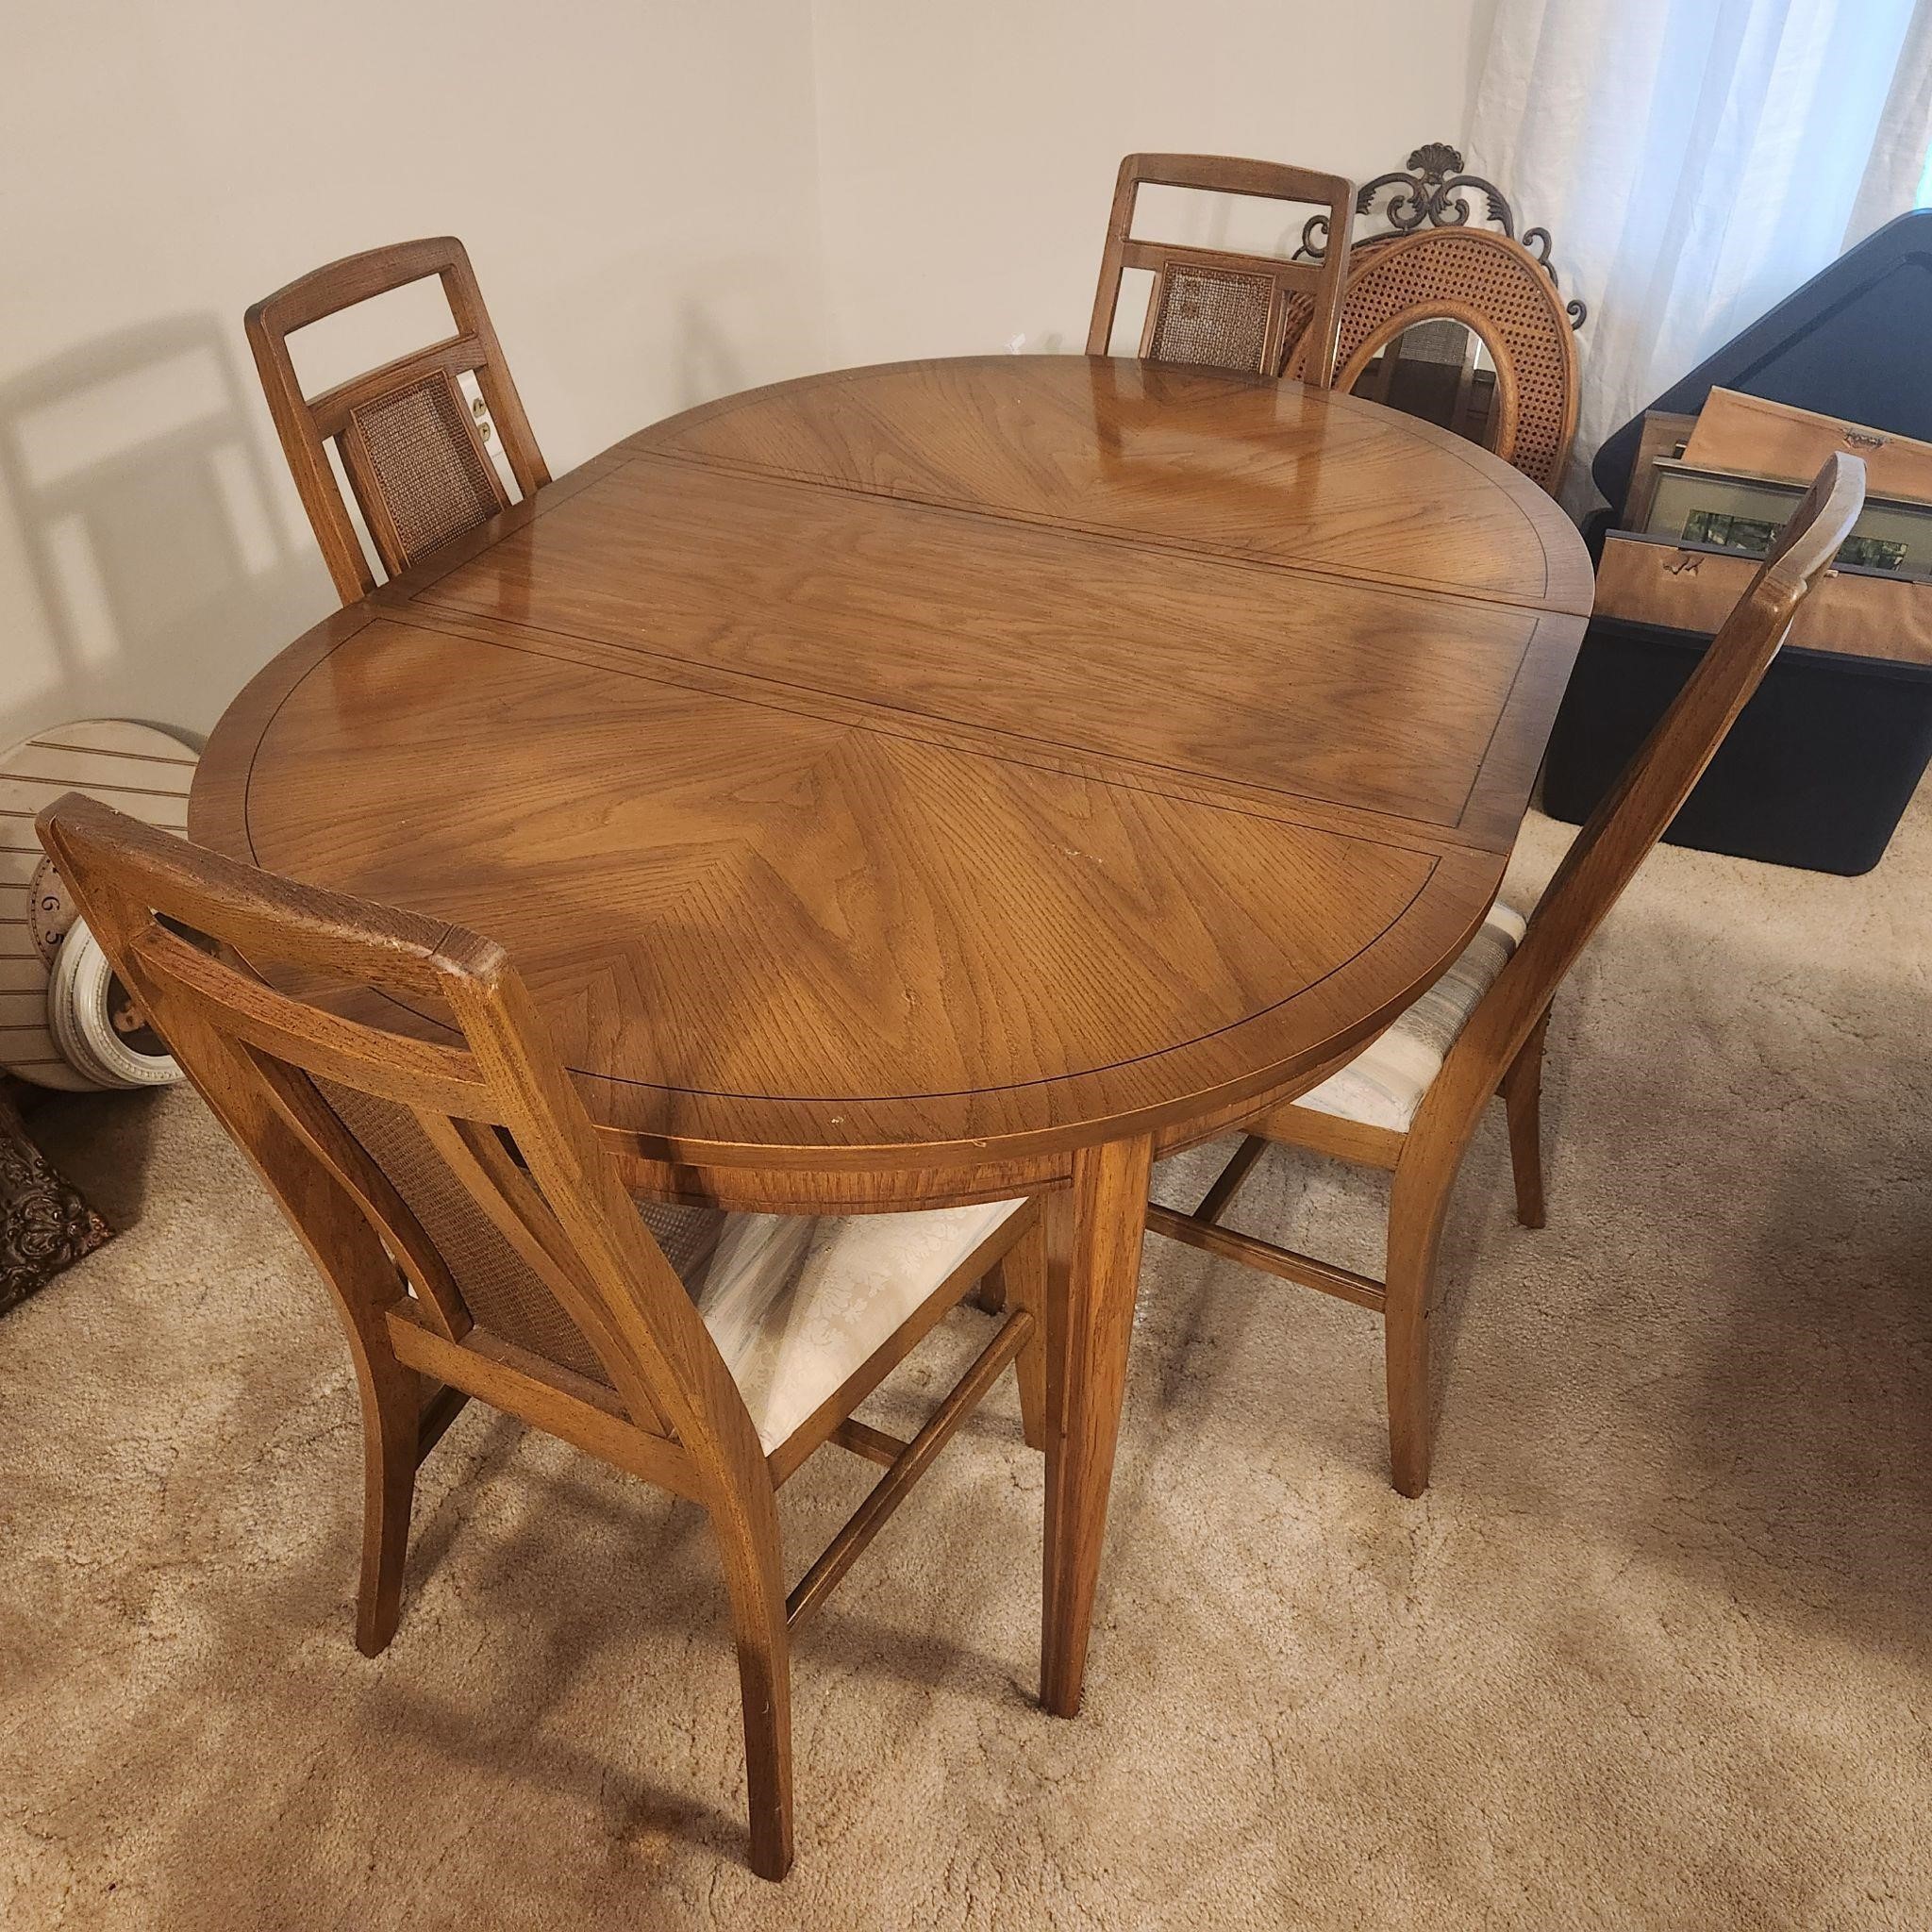 MCM Dining room table, 4 chairs, 2 leaves. 62 x 44